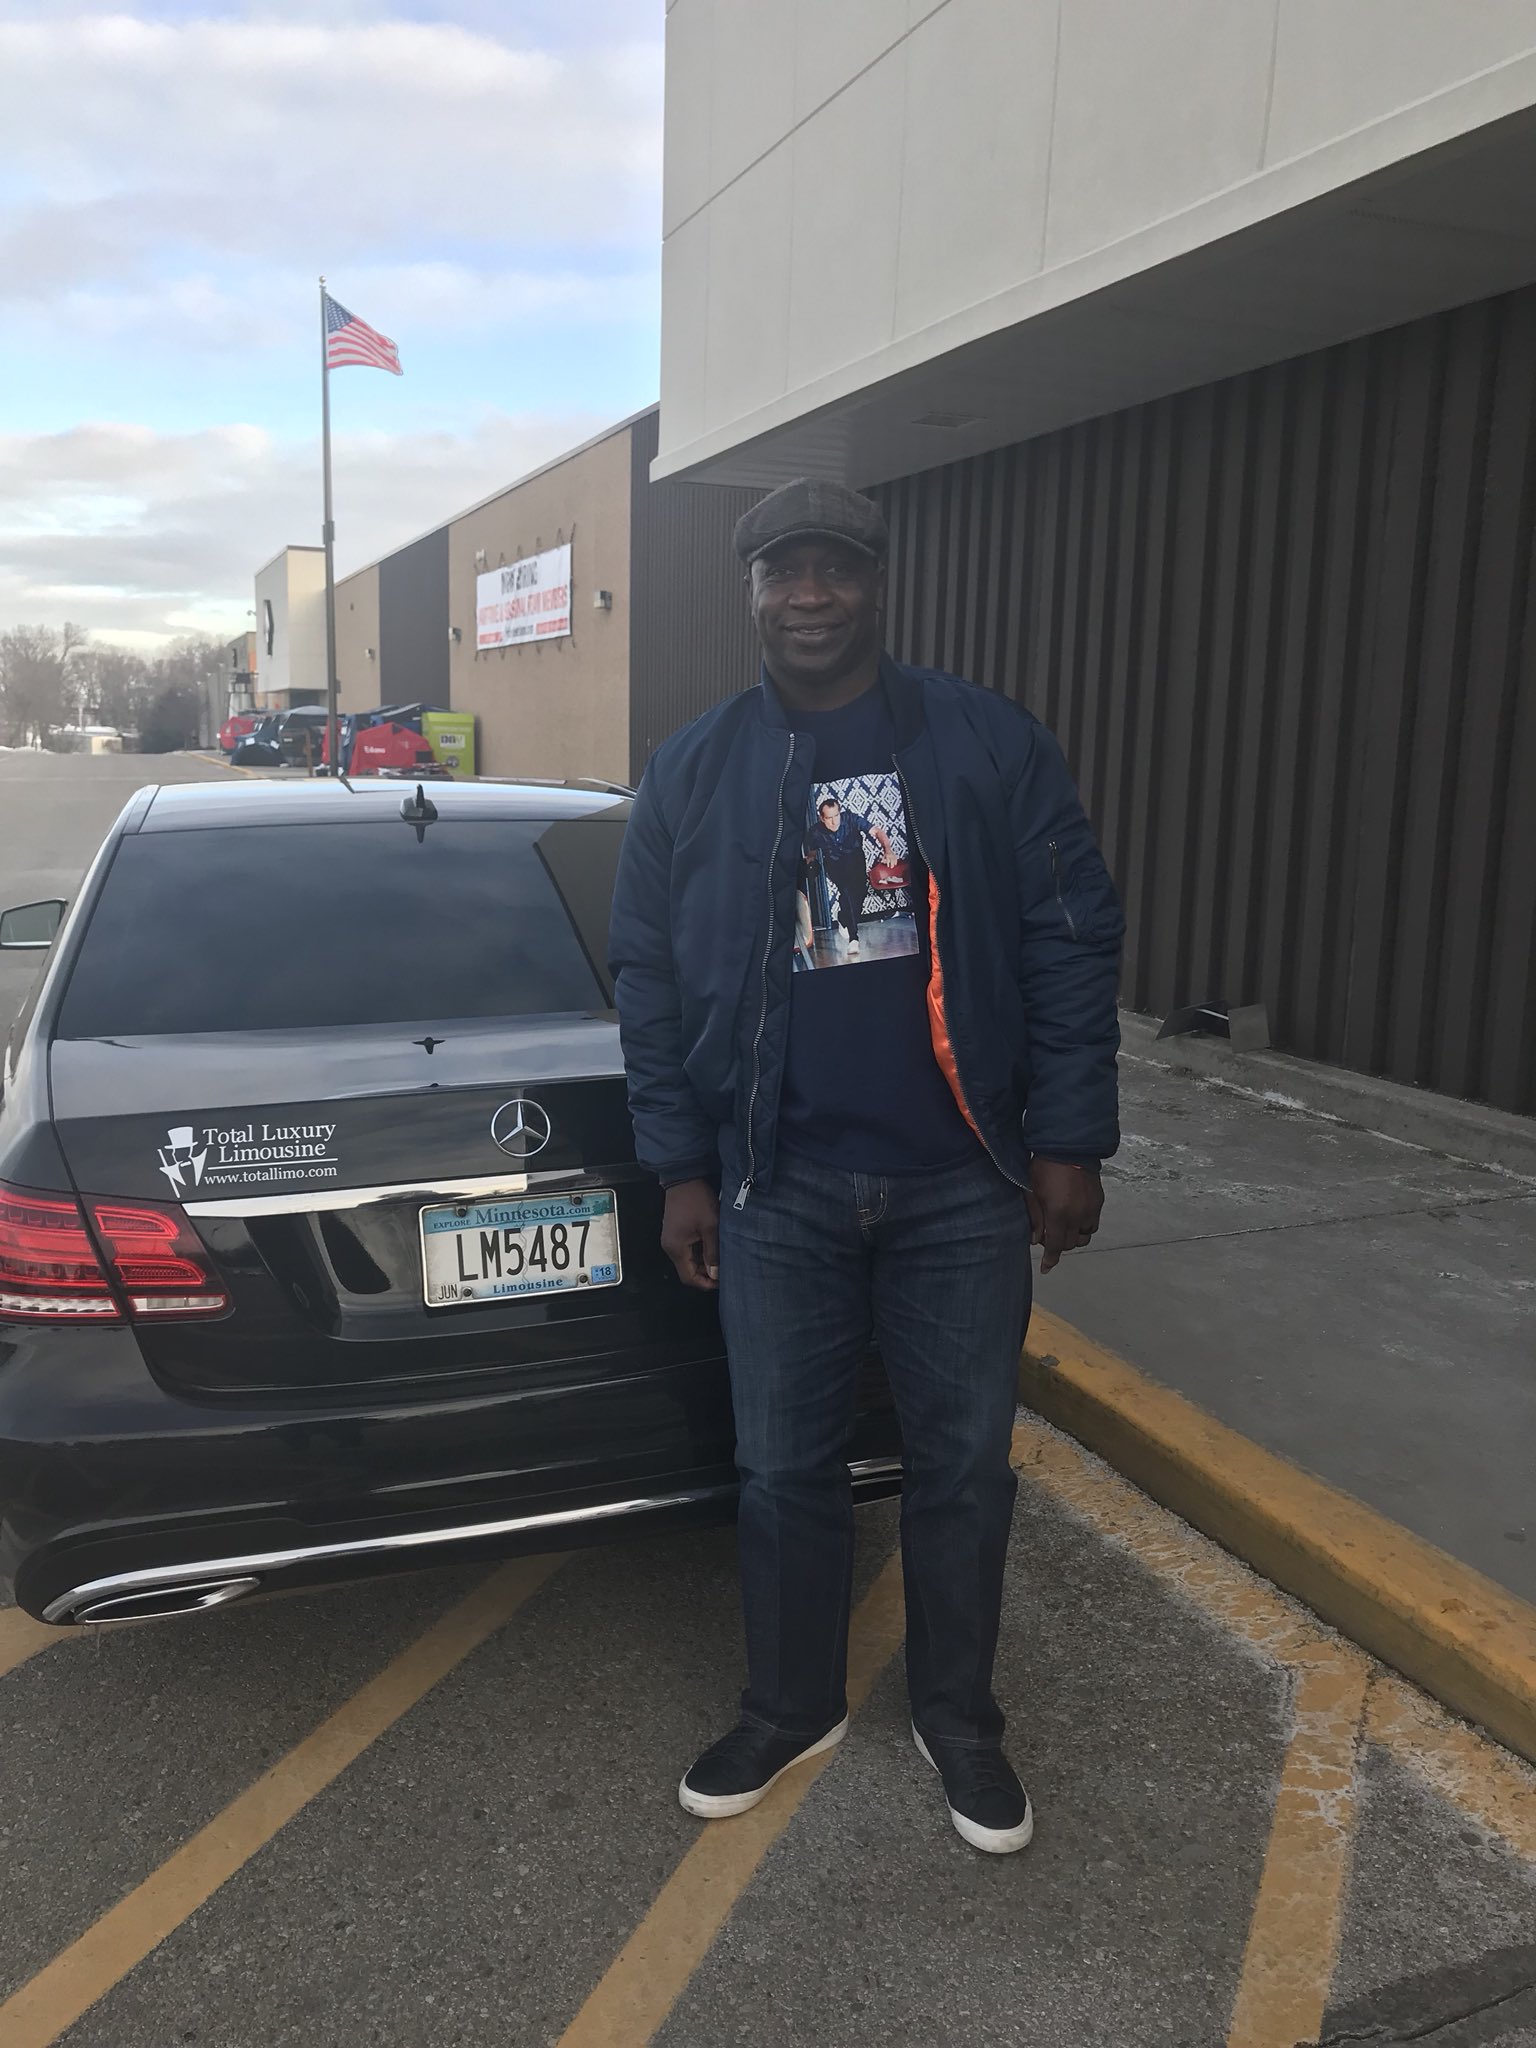 Happy Birthday to Mn Vikings legend, John Randle. It was our pleasure to drive you around town today! 